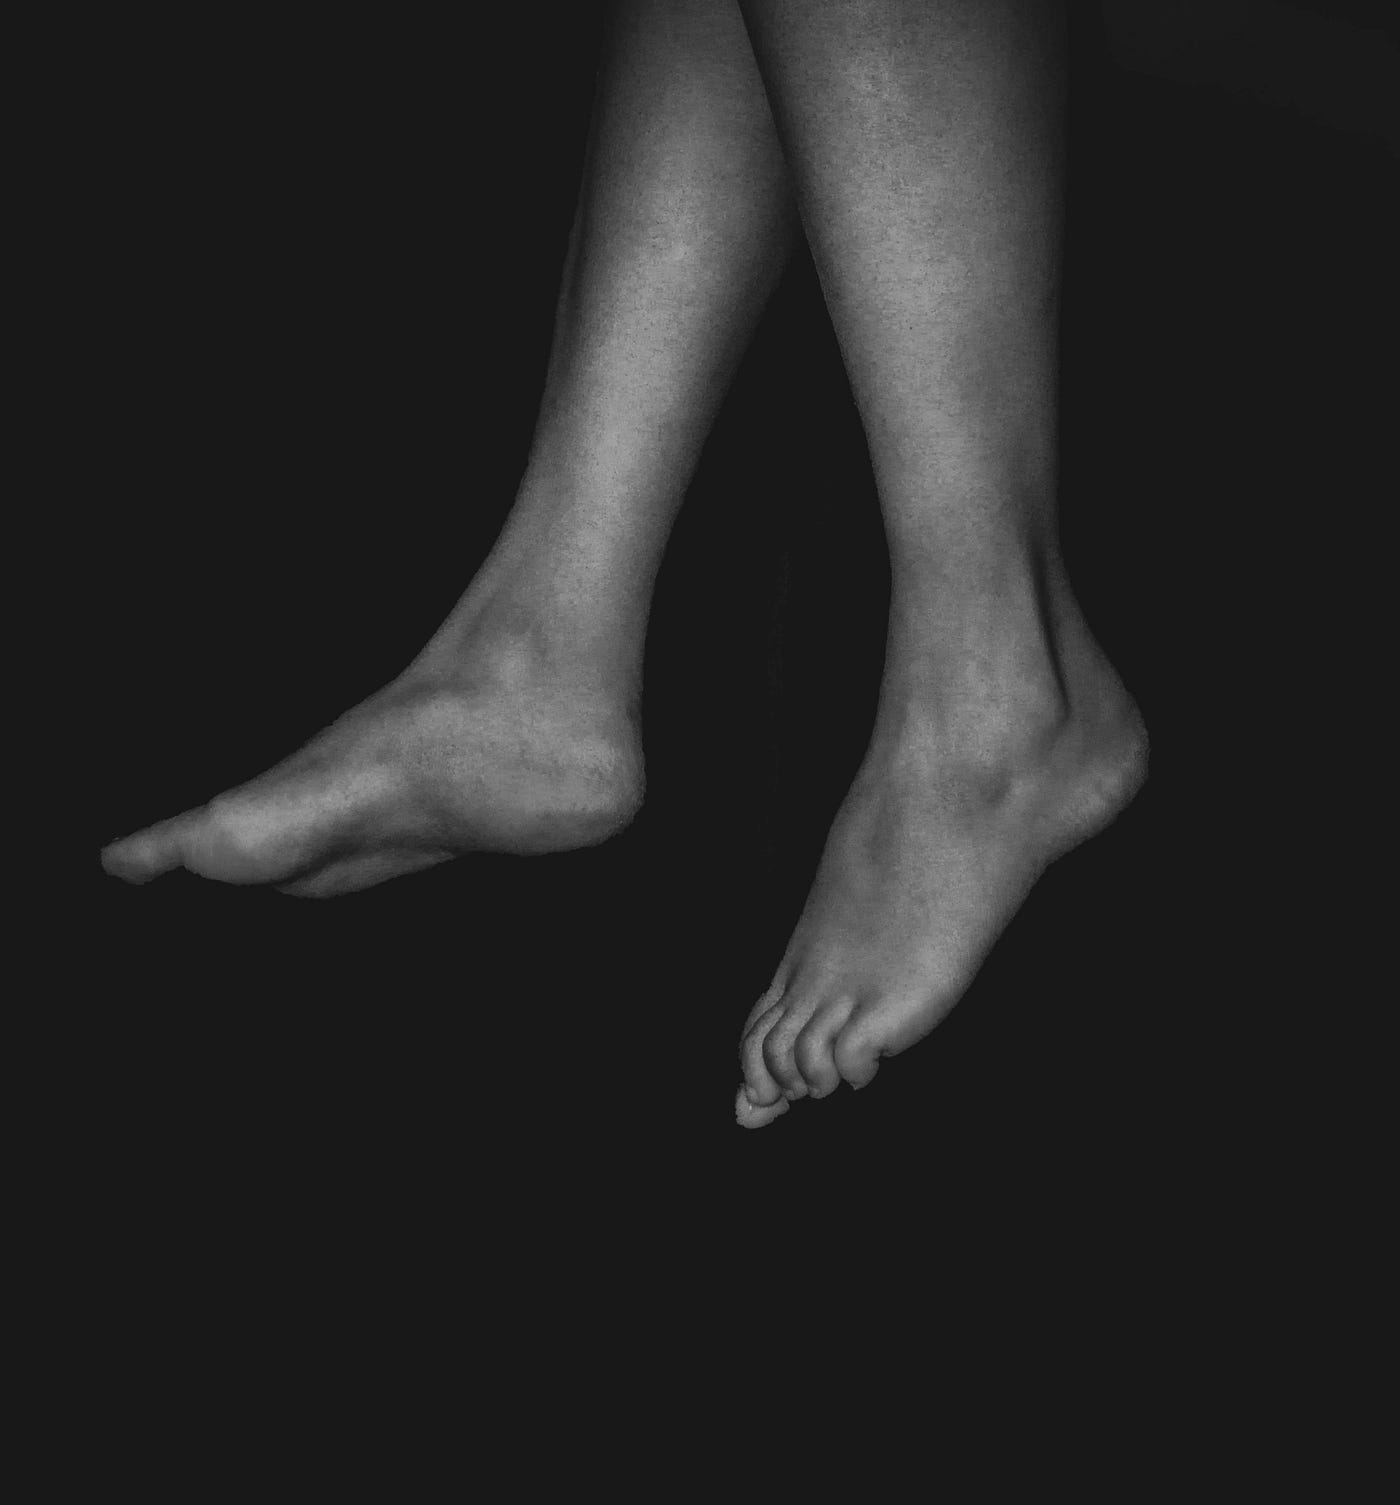 Two legs dangle into the image from above. We see the lower extremities from upper calf level down. Black background.